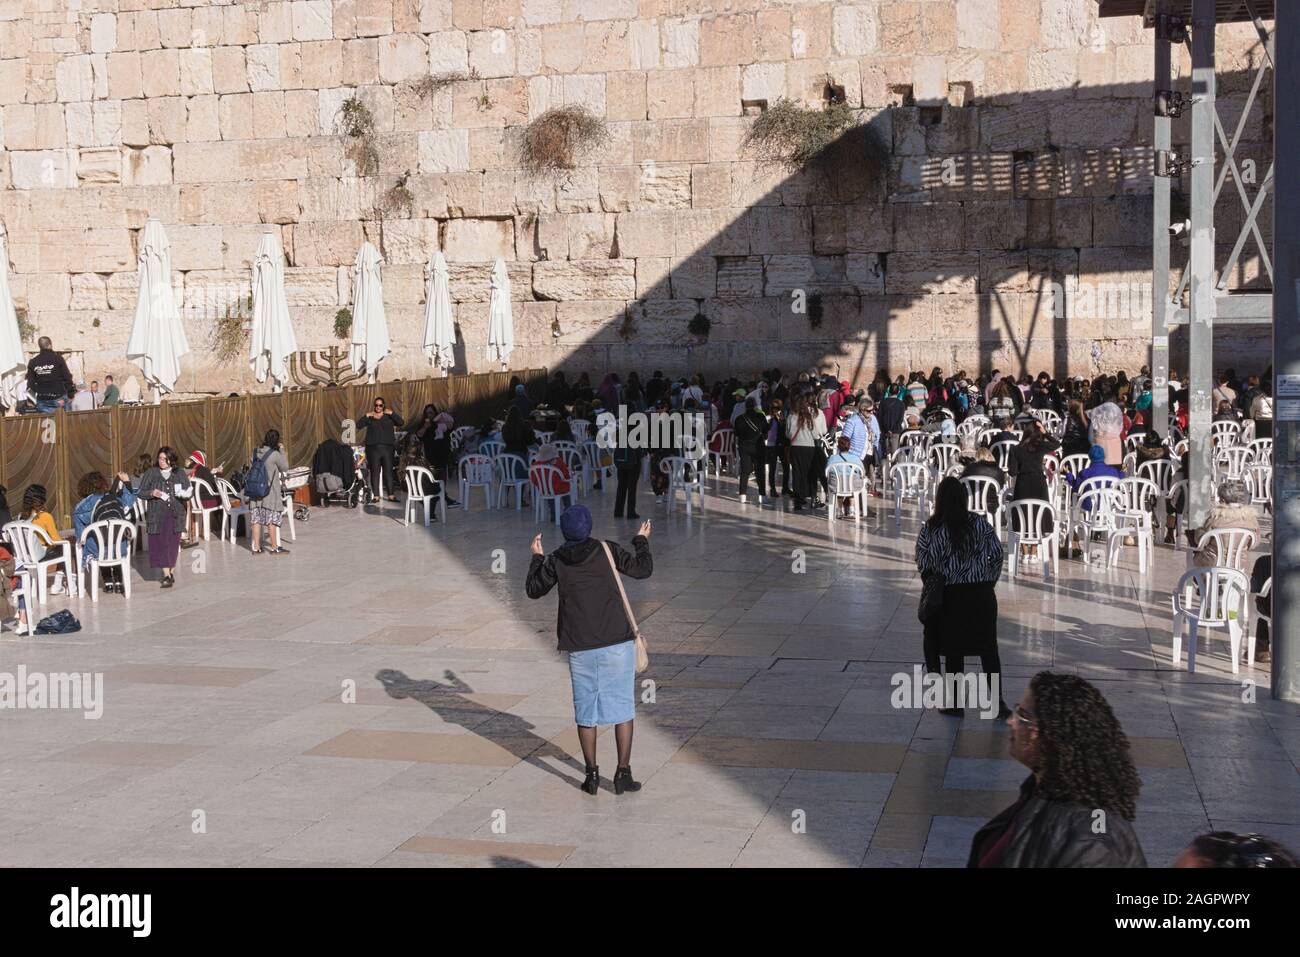 The Wailing wall - Western wall - Kotel, in the old city of Jerusalem, Israel Stock Photo